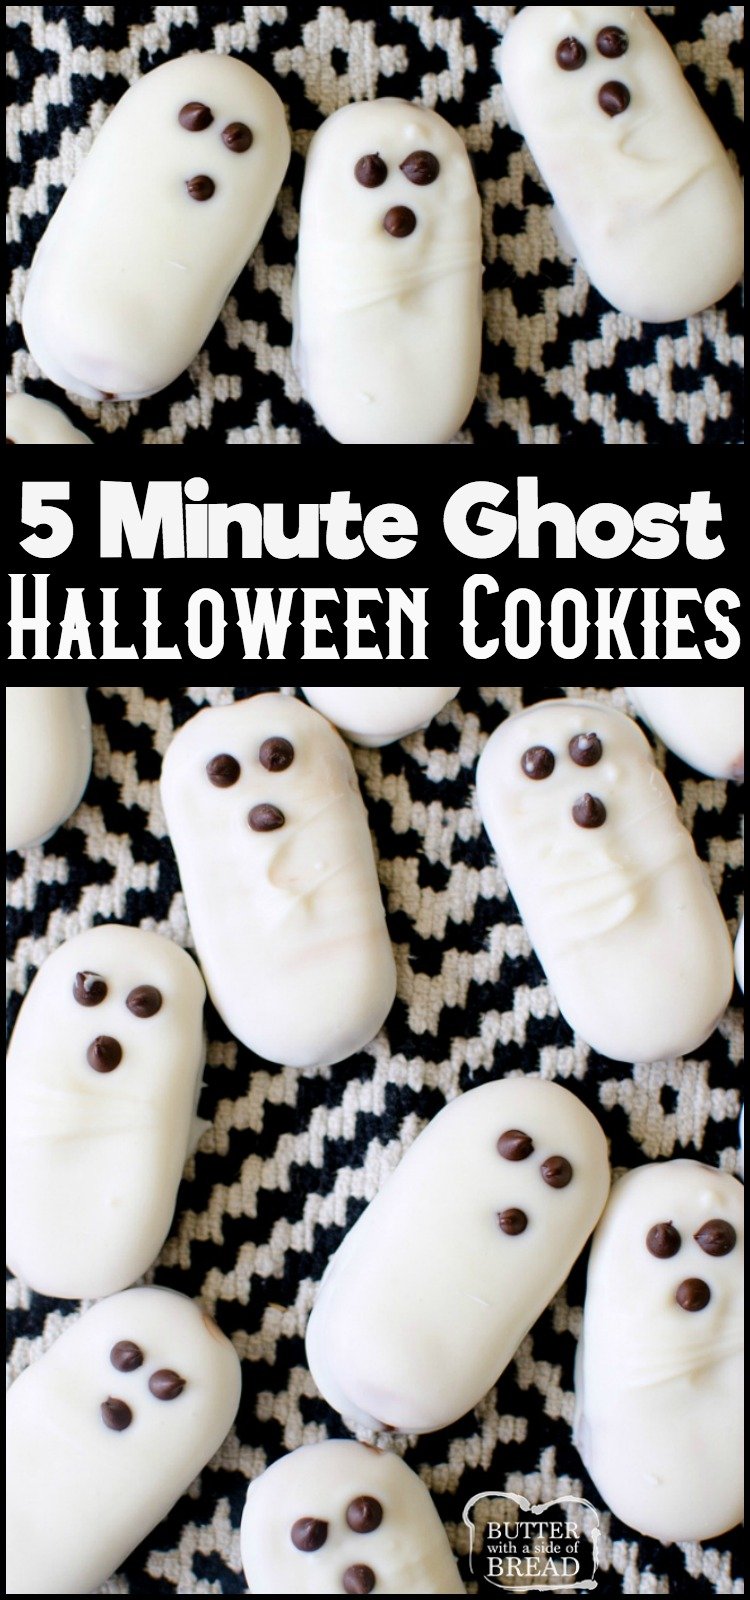 3 Ingredient Easy Ghost Halloween Cookies are a cute and festive treat! Made in minutes & devoured in seconds, these easy Halloween cookies are a hit!